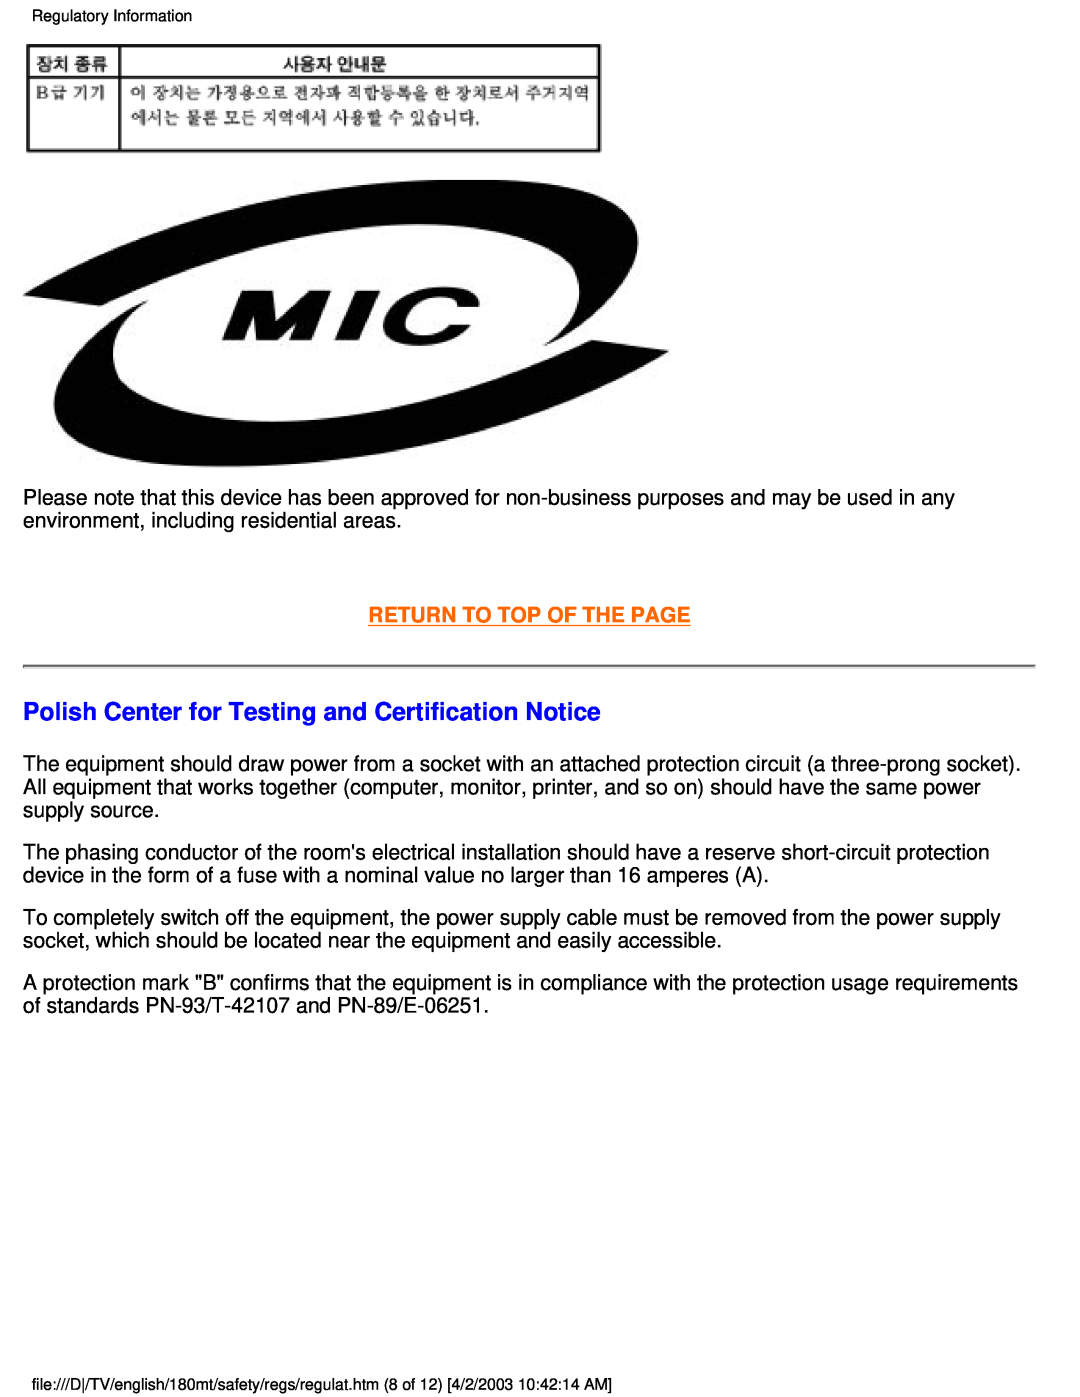 Philips 180MT manual Polish Center for Testing and Certification Notice, Return To Top Of The Page 